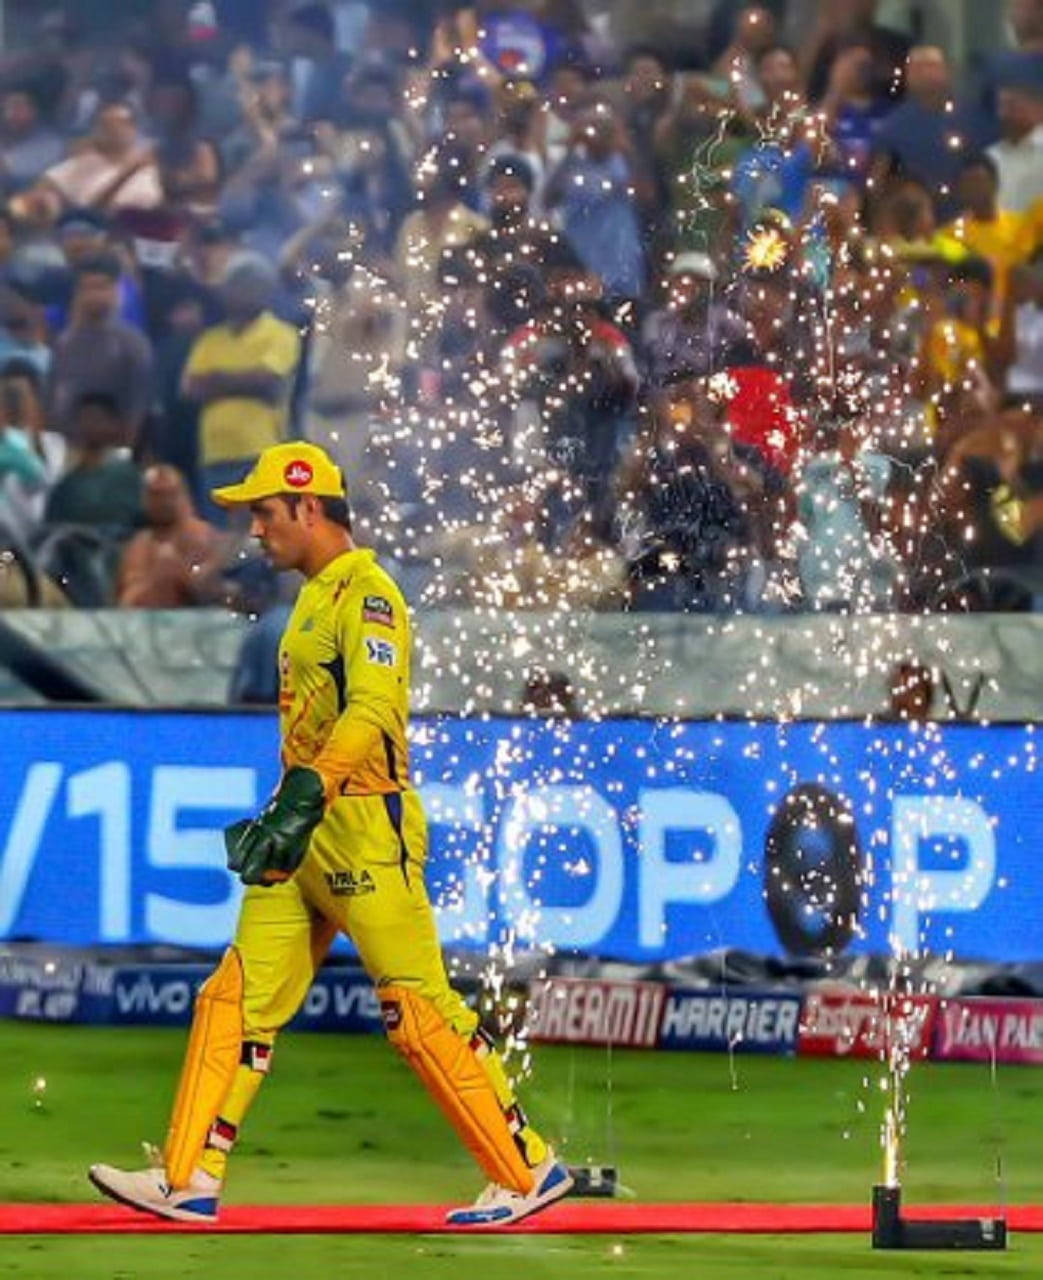 Msd Walking With Fireworks